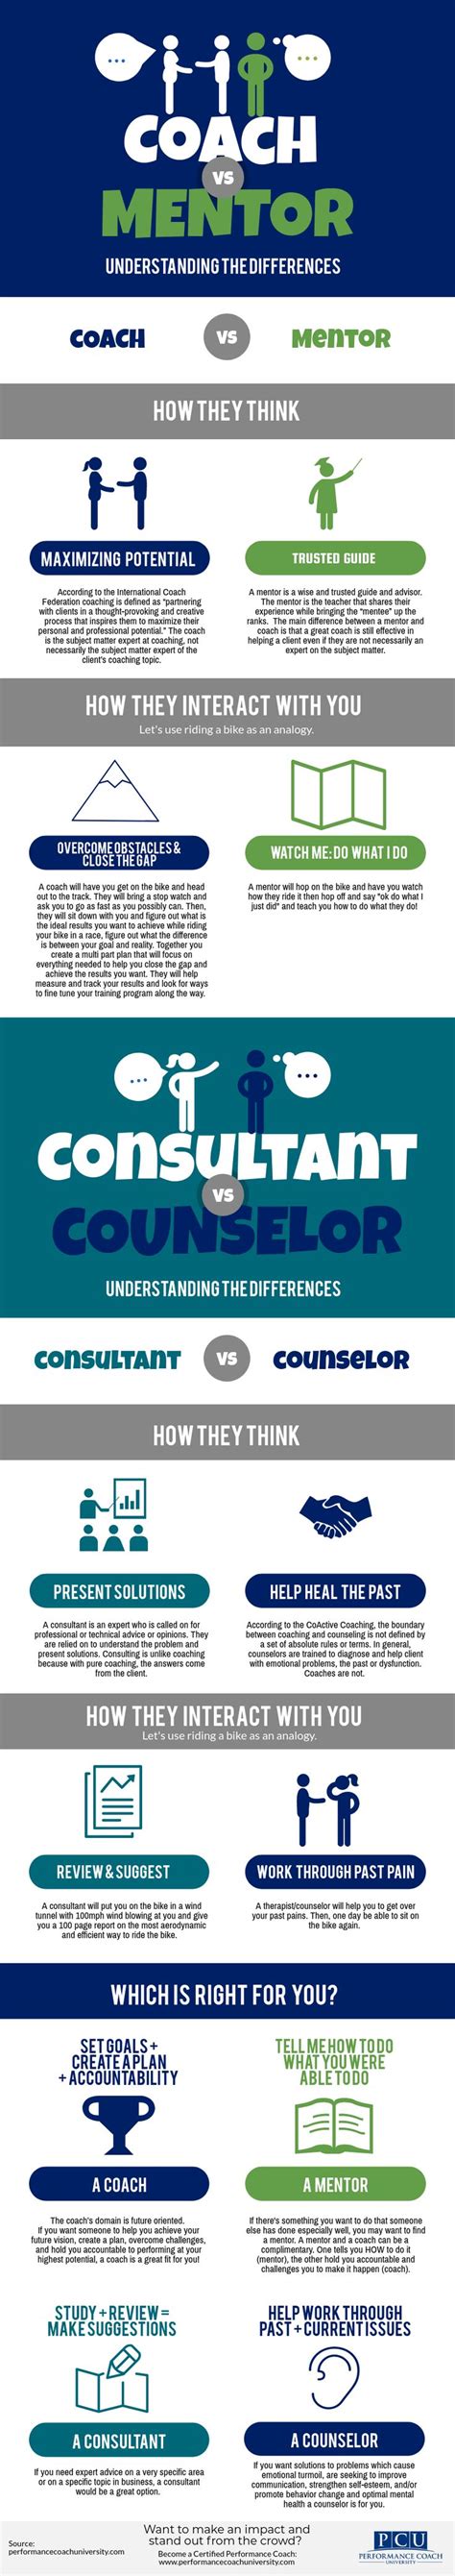 What Is The Role Of A Consultant Counselor Kymanikruwhorn